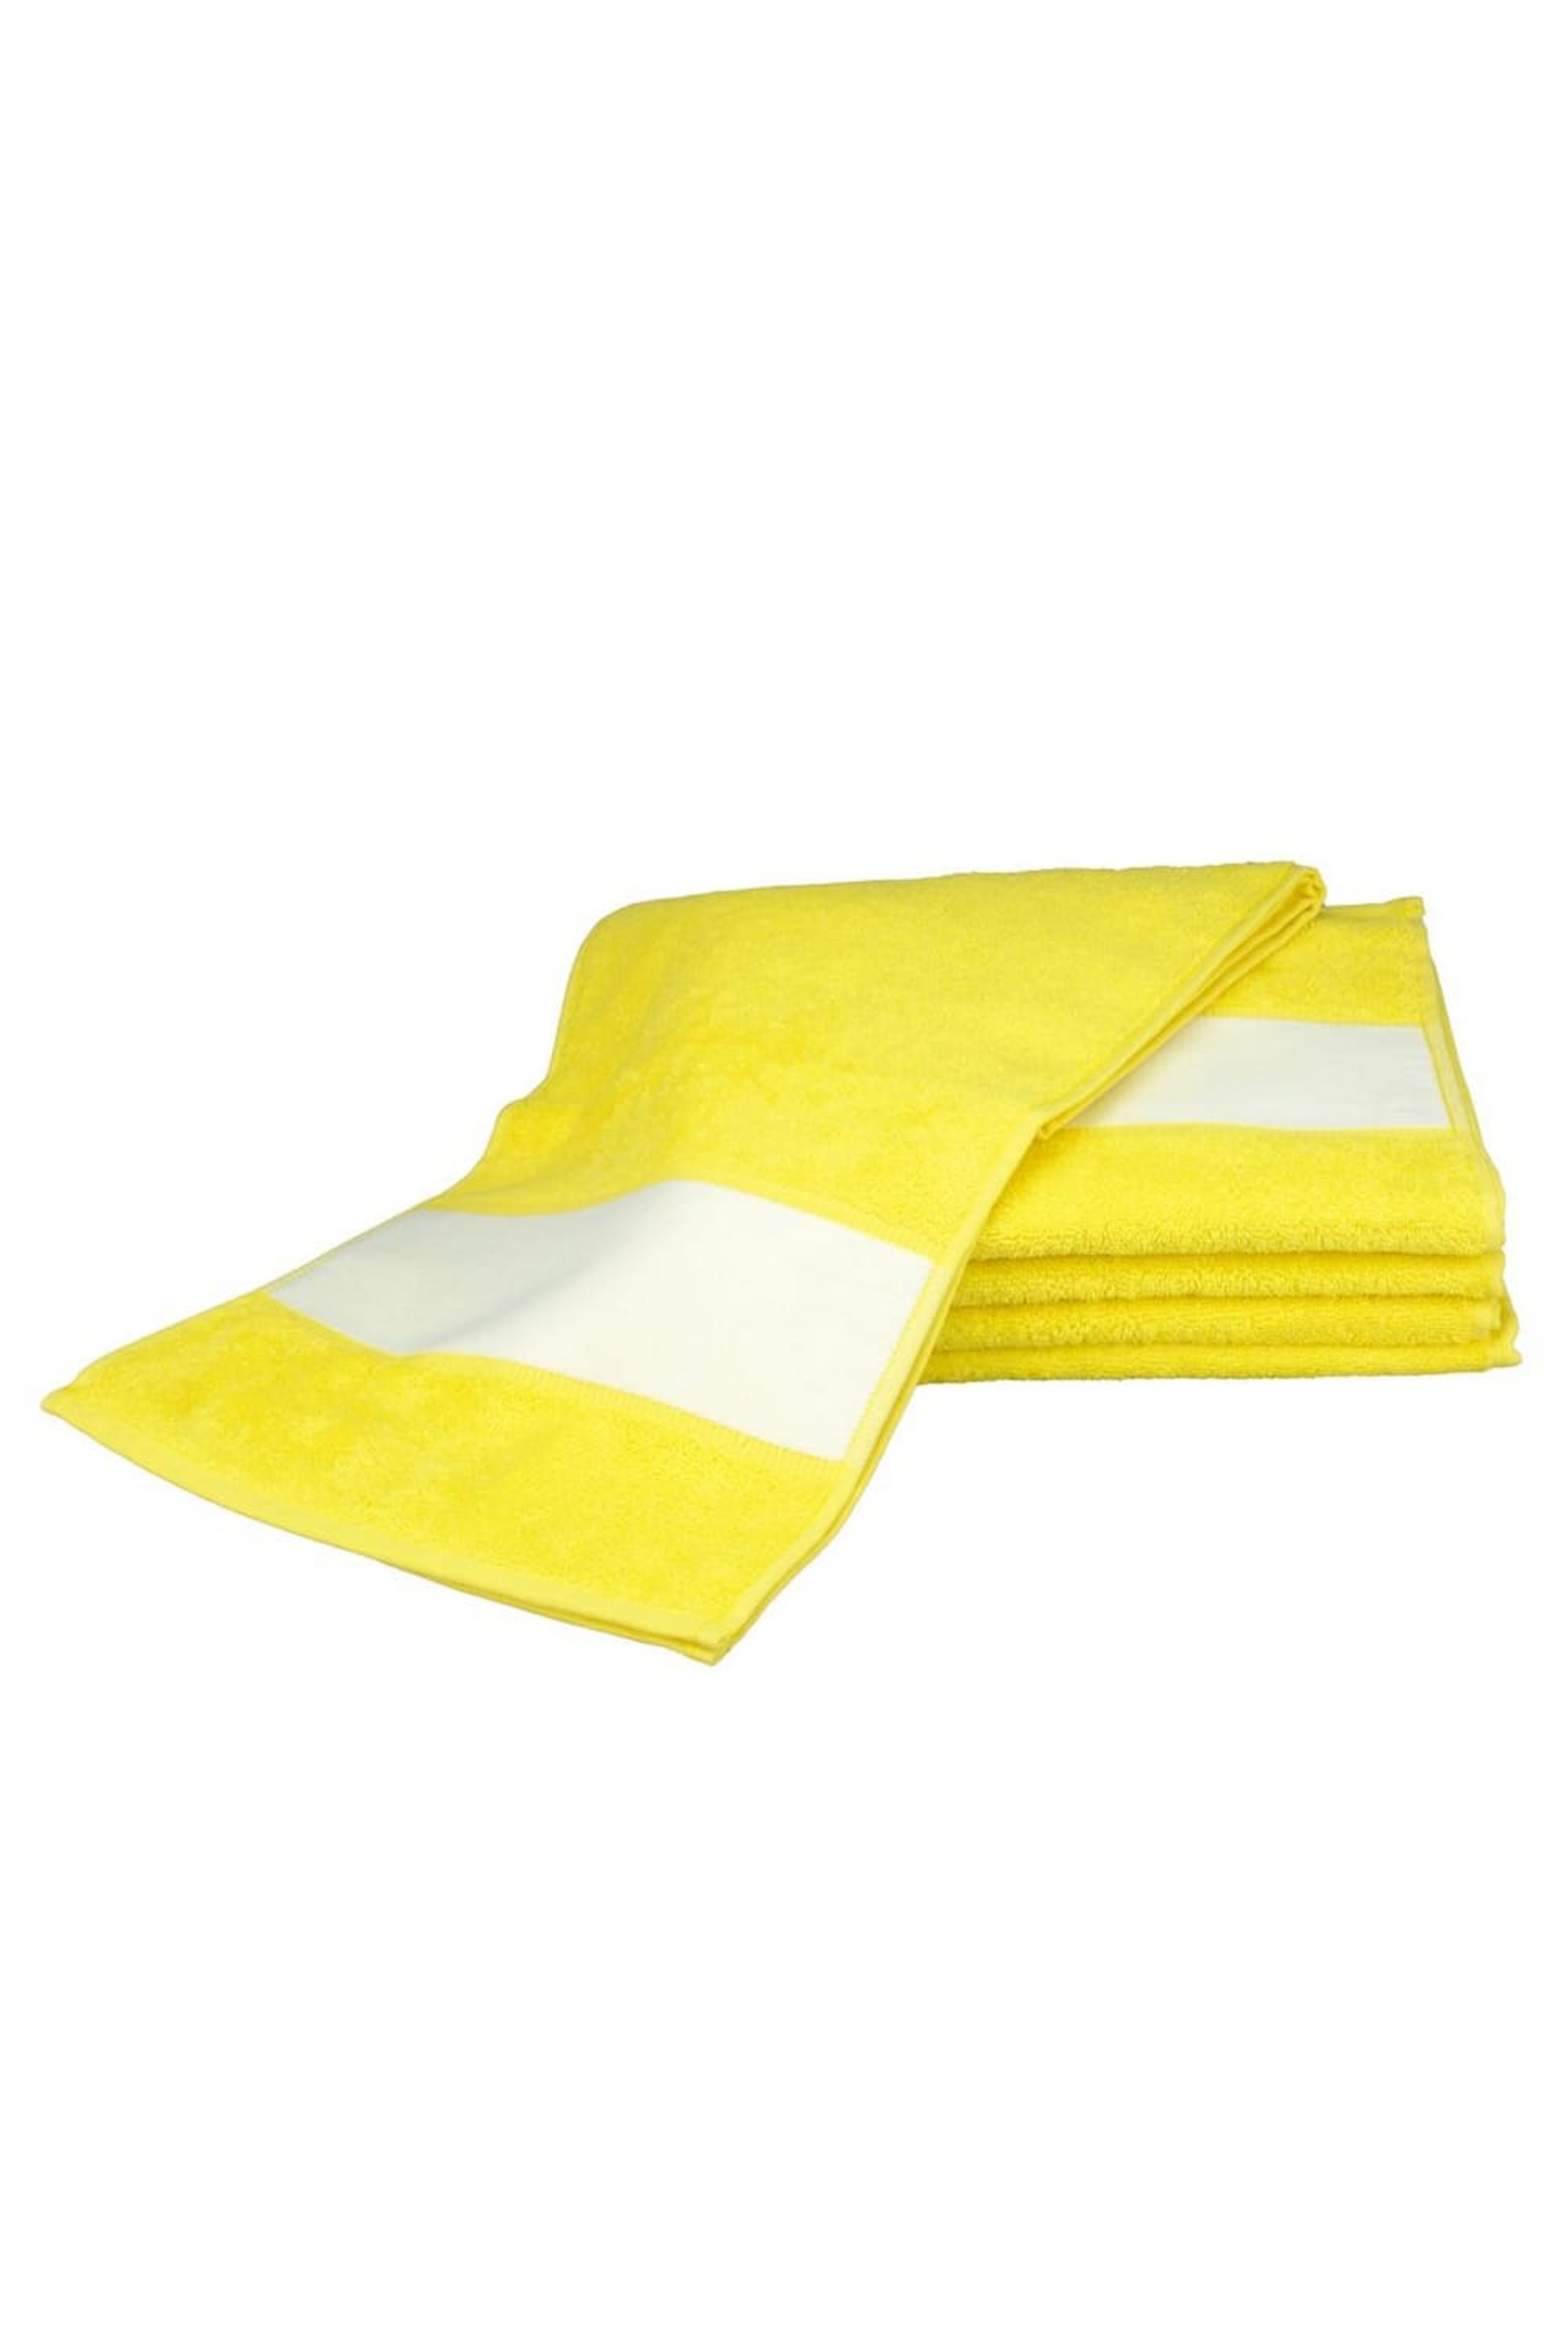 A&R TOWELS A&R TOWELS A&R TOWELS SUBLI-ME SPORT TOWEL (BRIGHT YELLOW) (ONE SIZE)